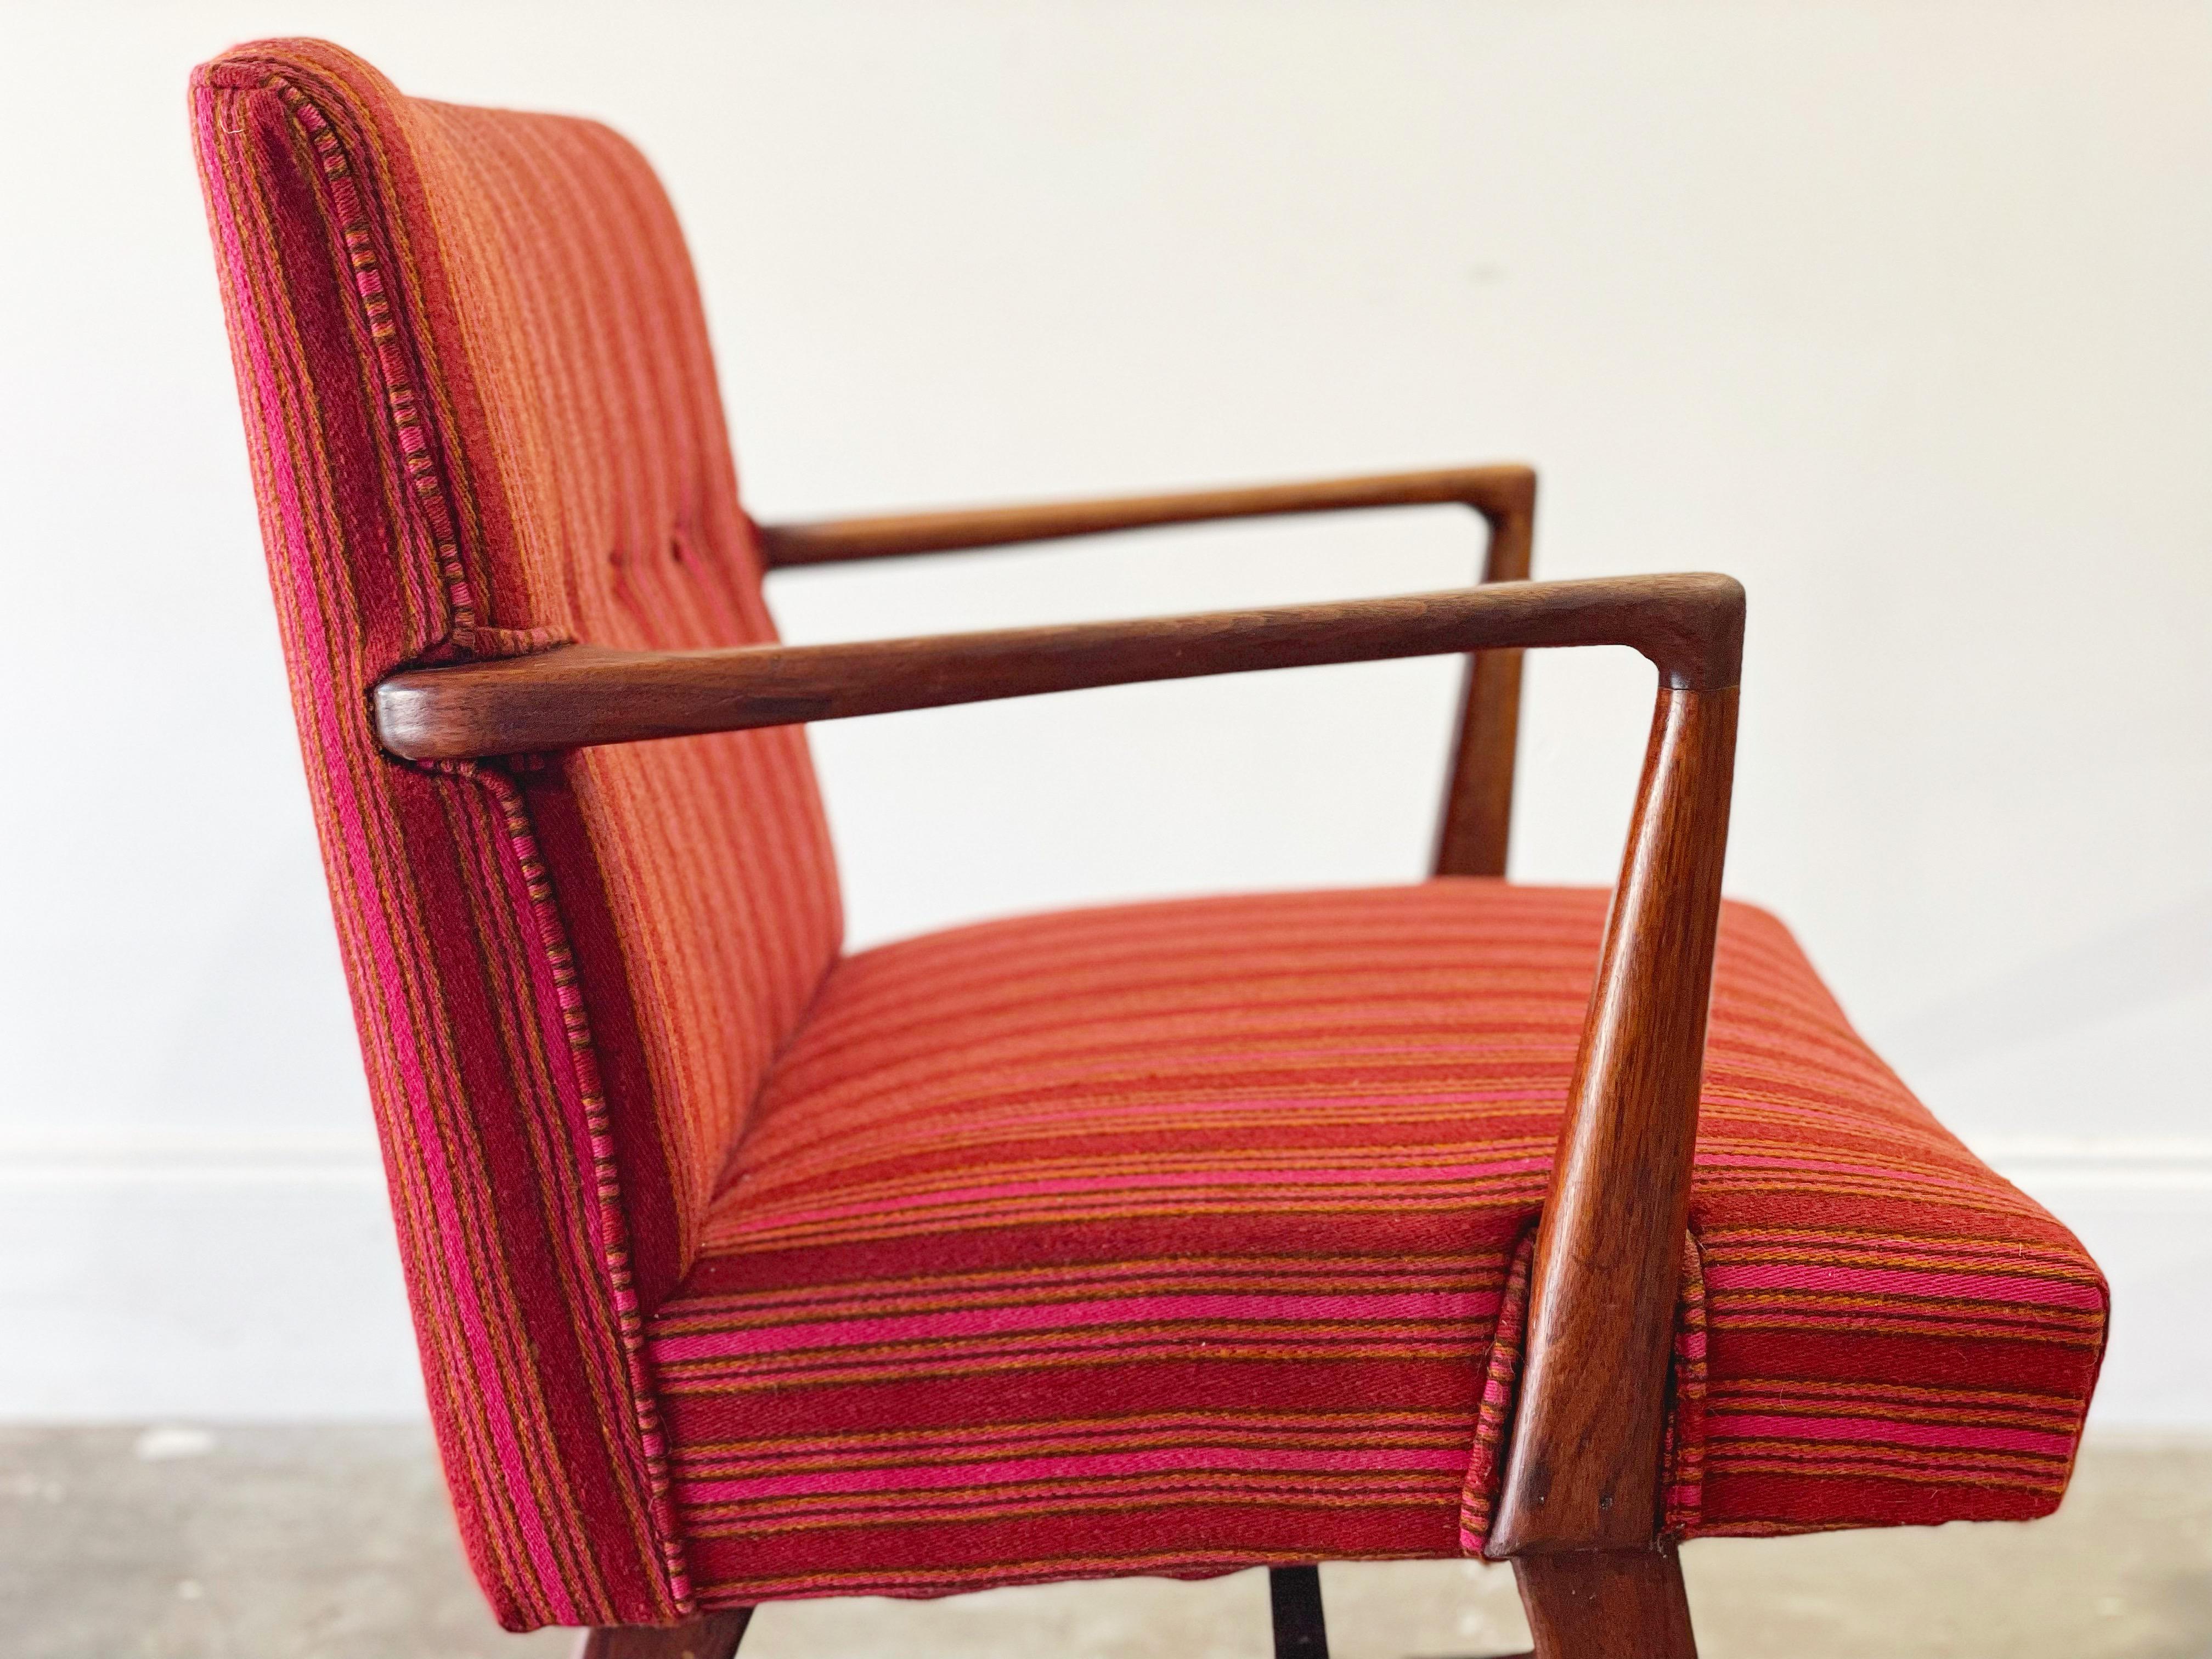 Fabulous pair of early Jens Risom model C108 armchairs in solid American black walnut with original Alexander Girard pink striped upholstery. Originally designed in 1948 shortly after Risom left Knoll. These examples have seen little use over the